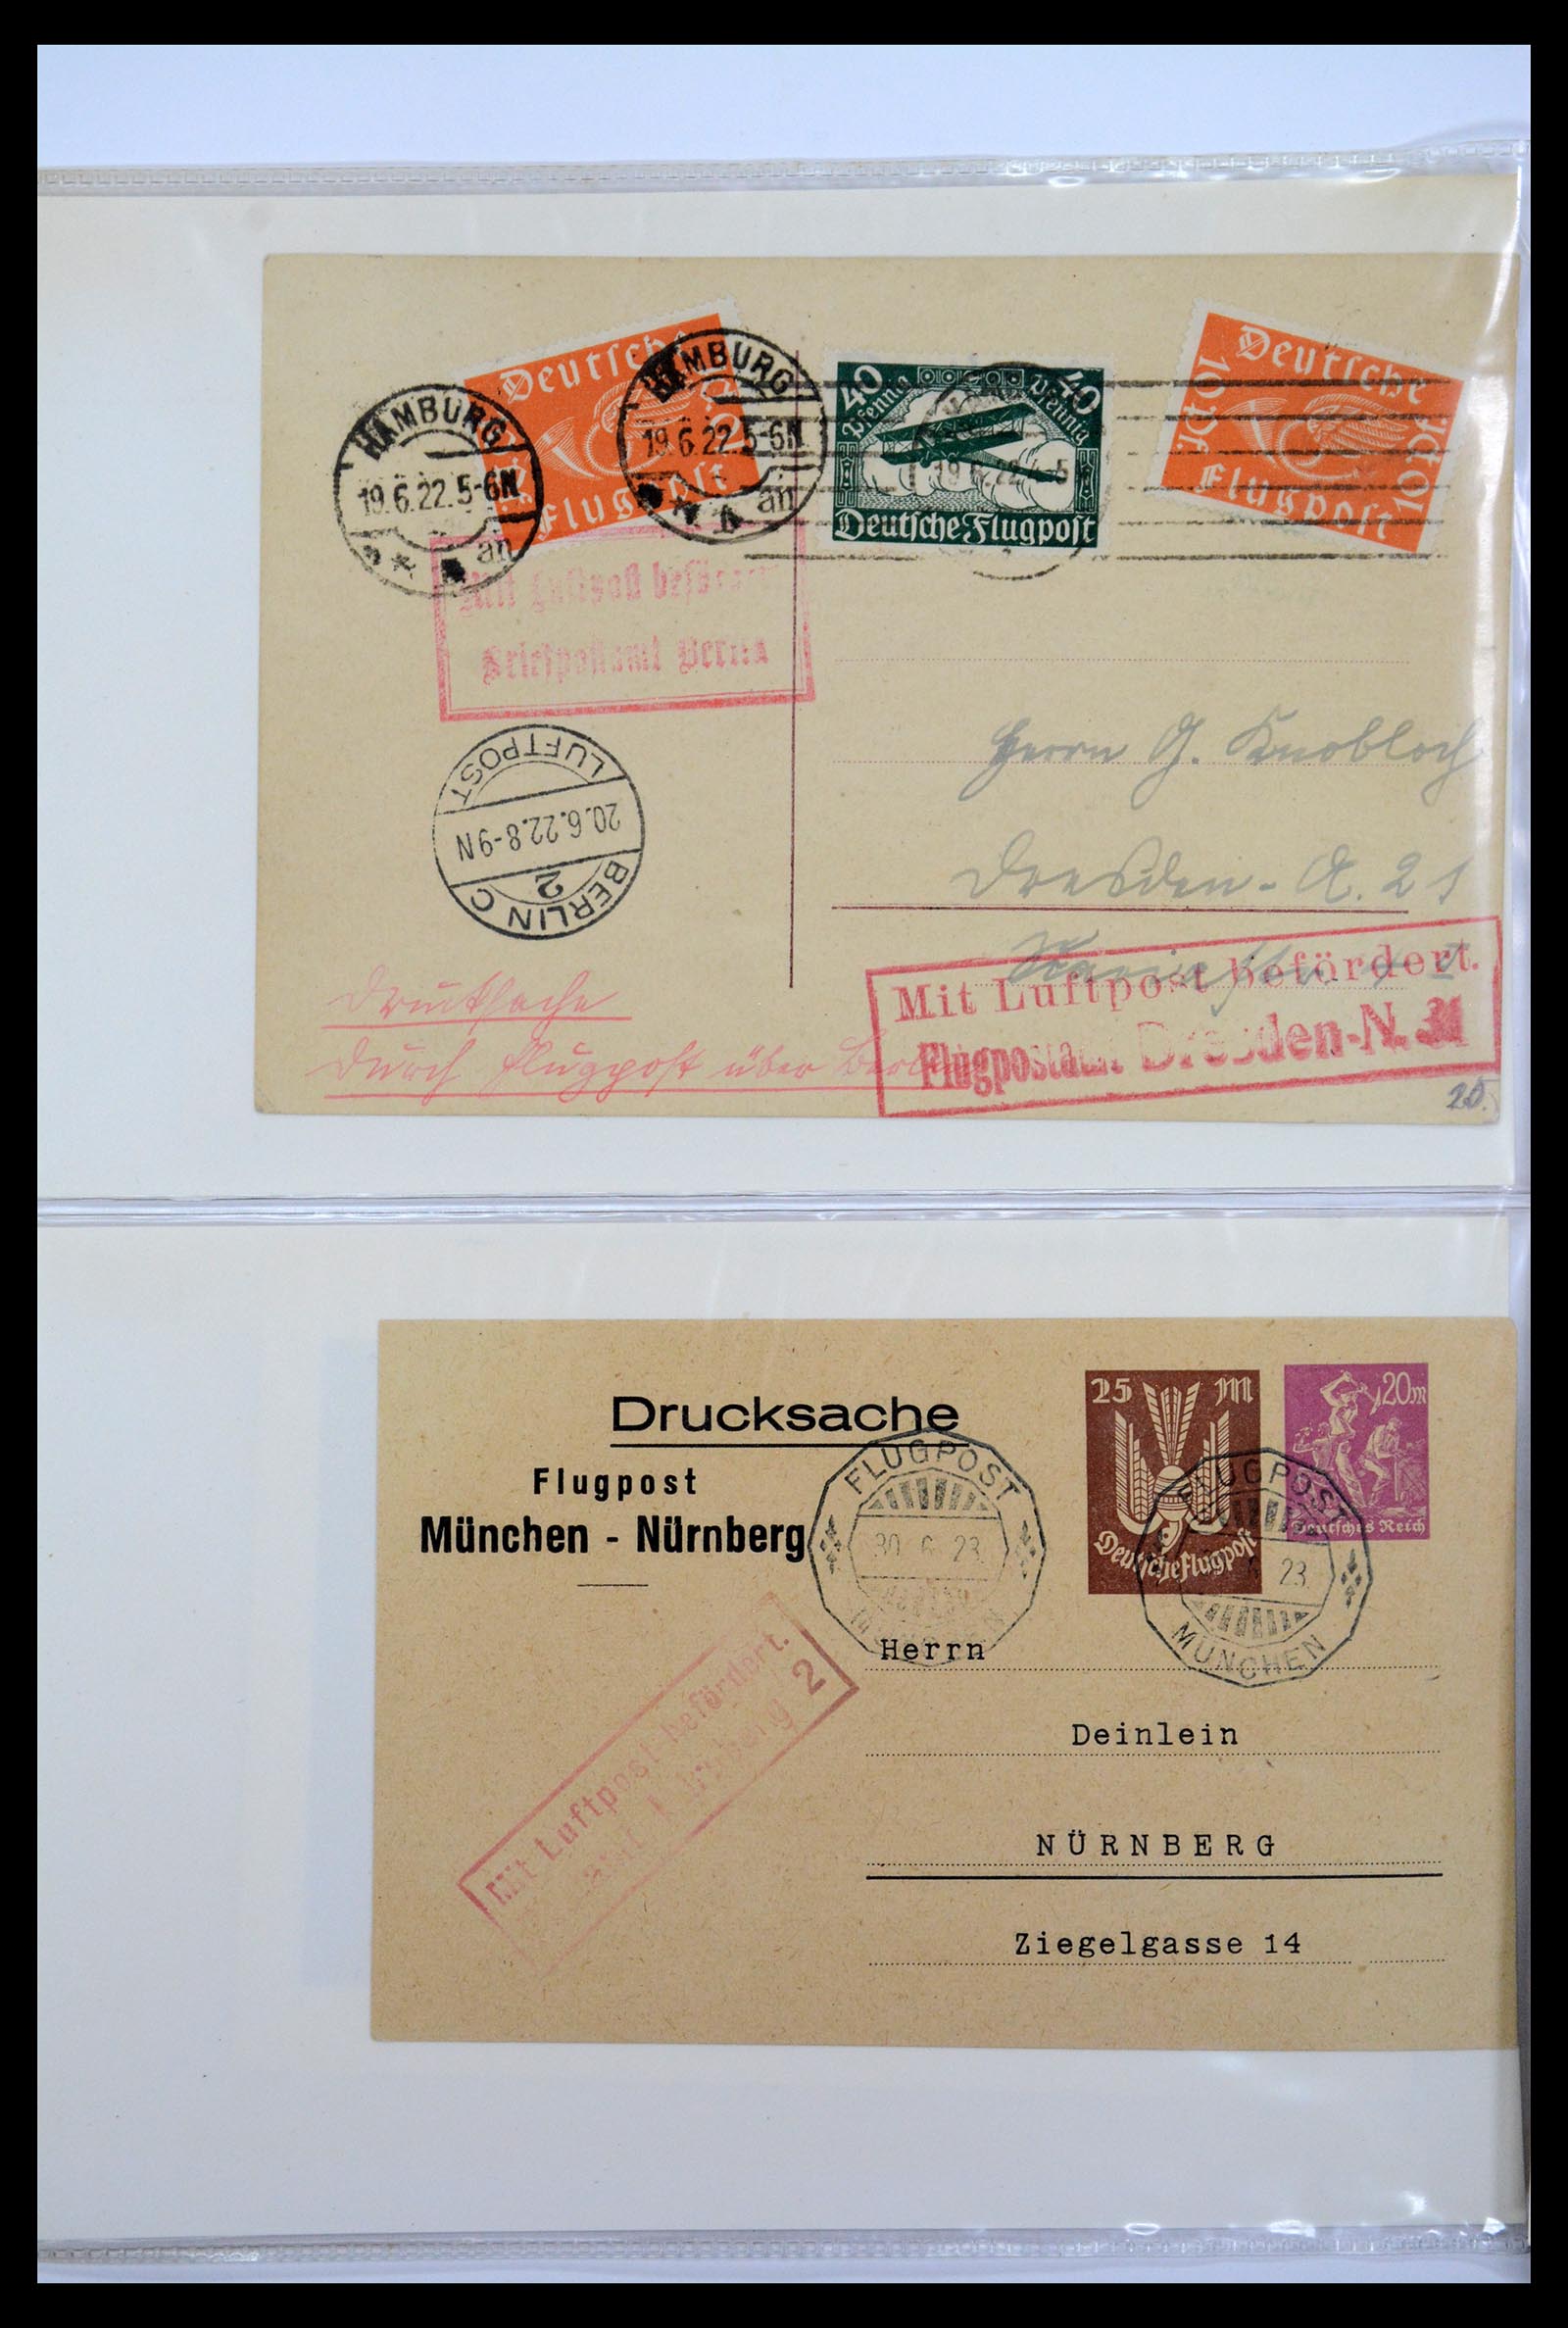 36009 018 - Stamp collection 36009 Airmail stamps and covers 1920-1940.